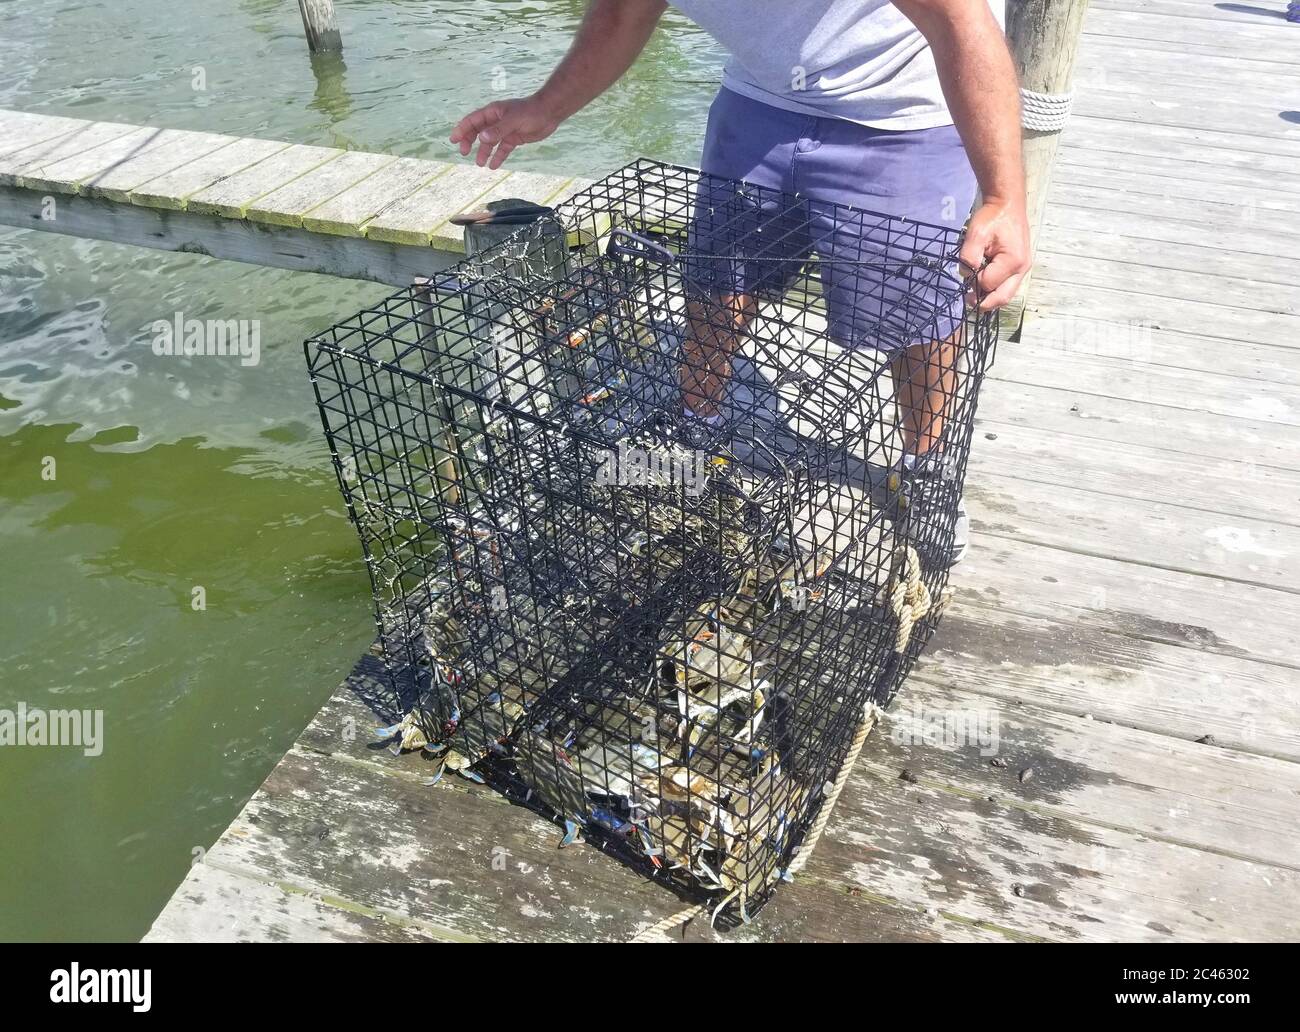 Pulling the crab pot filled with blue crabs from the bay Stock Photo